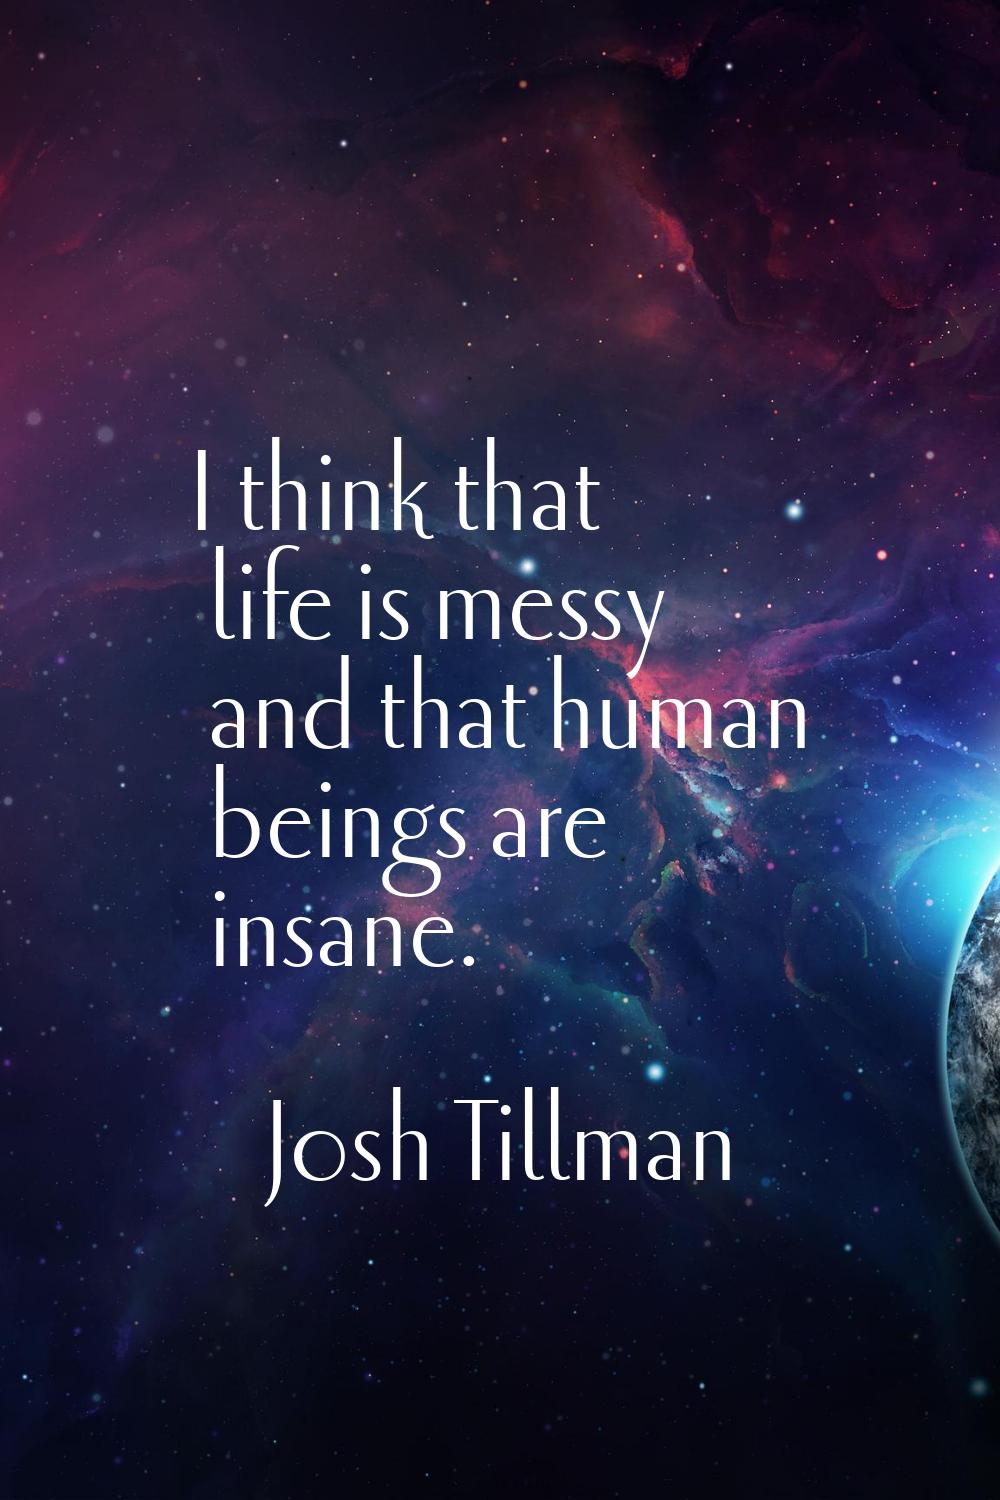 I think that life is messy and that human beings are insane.